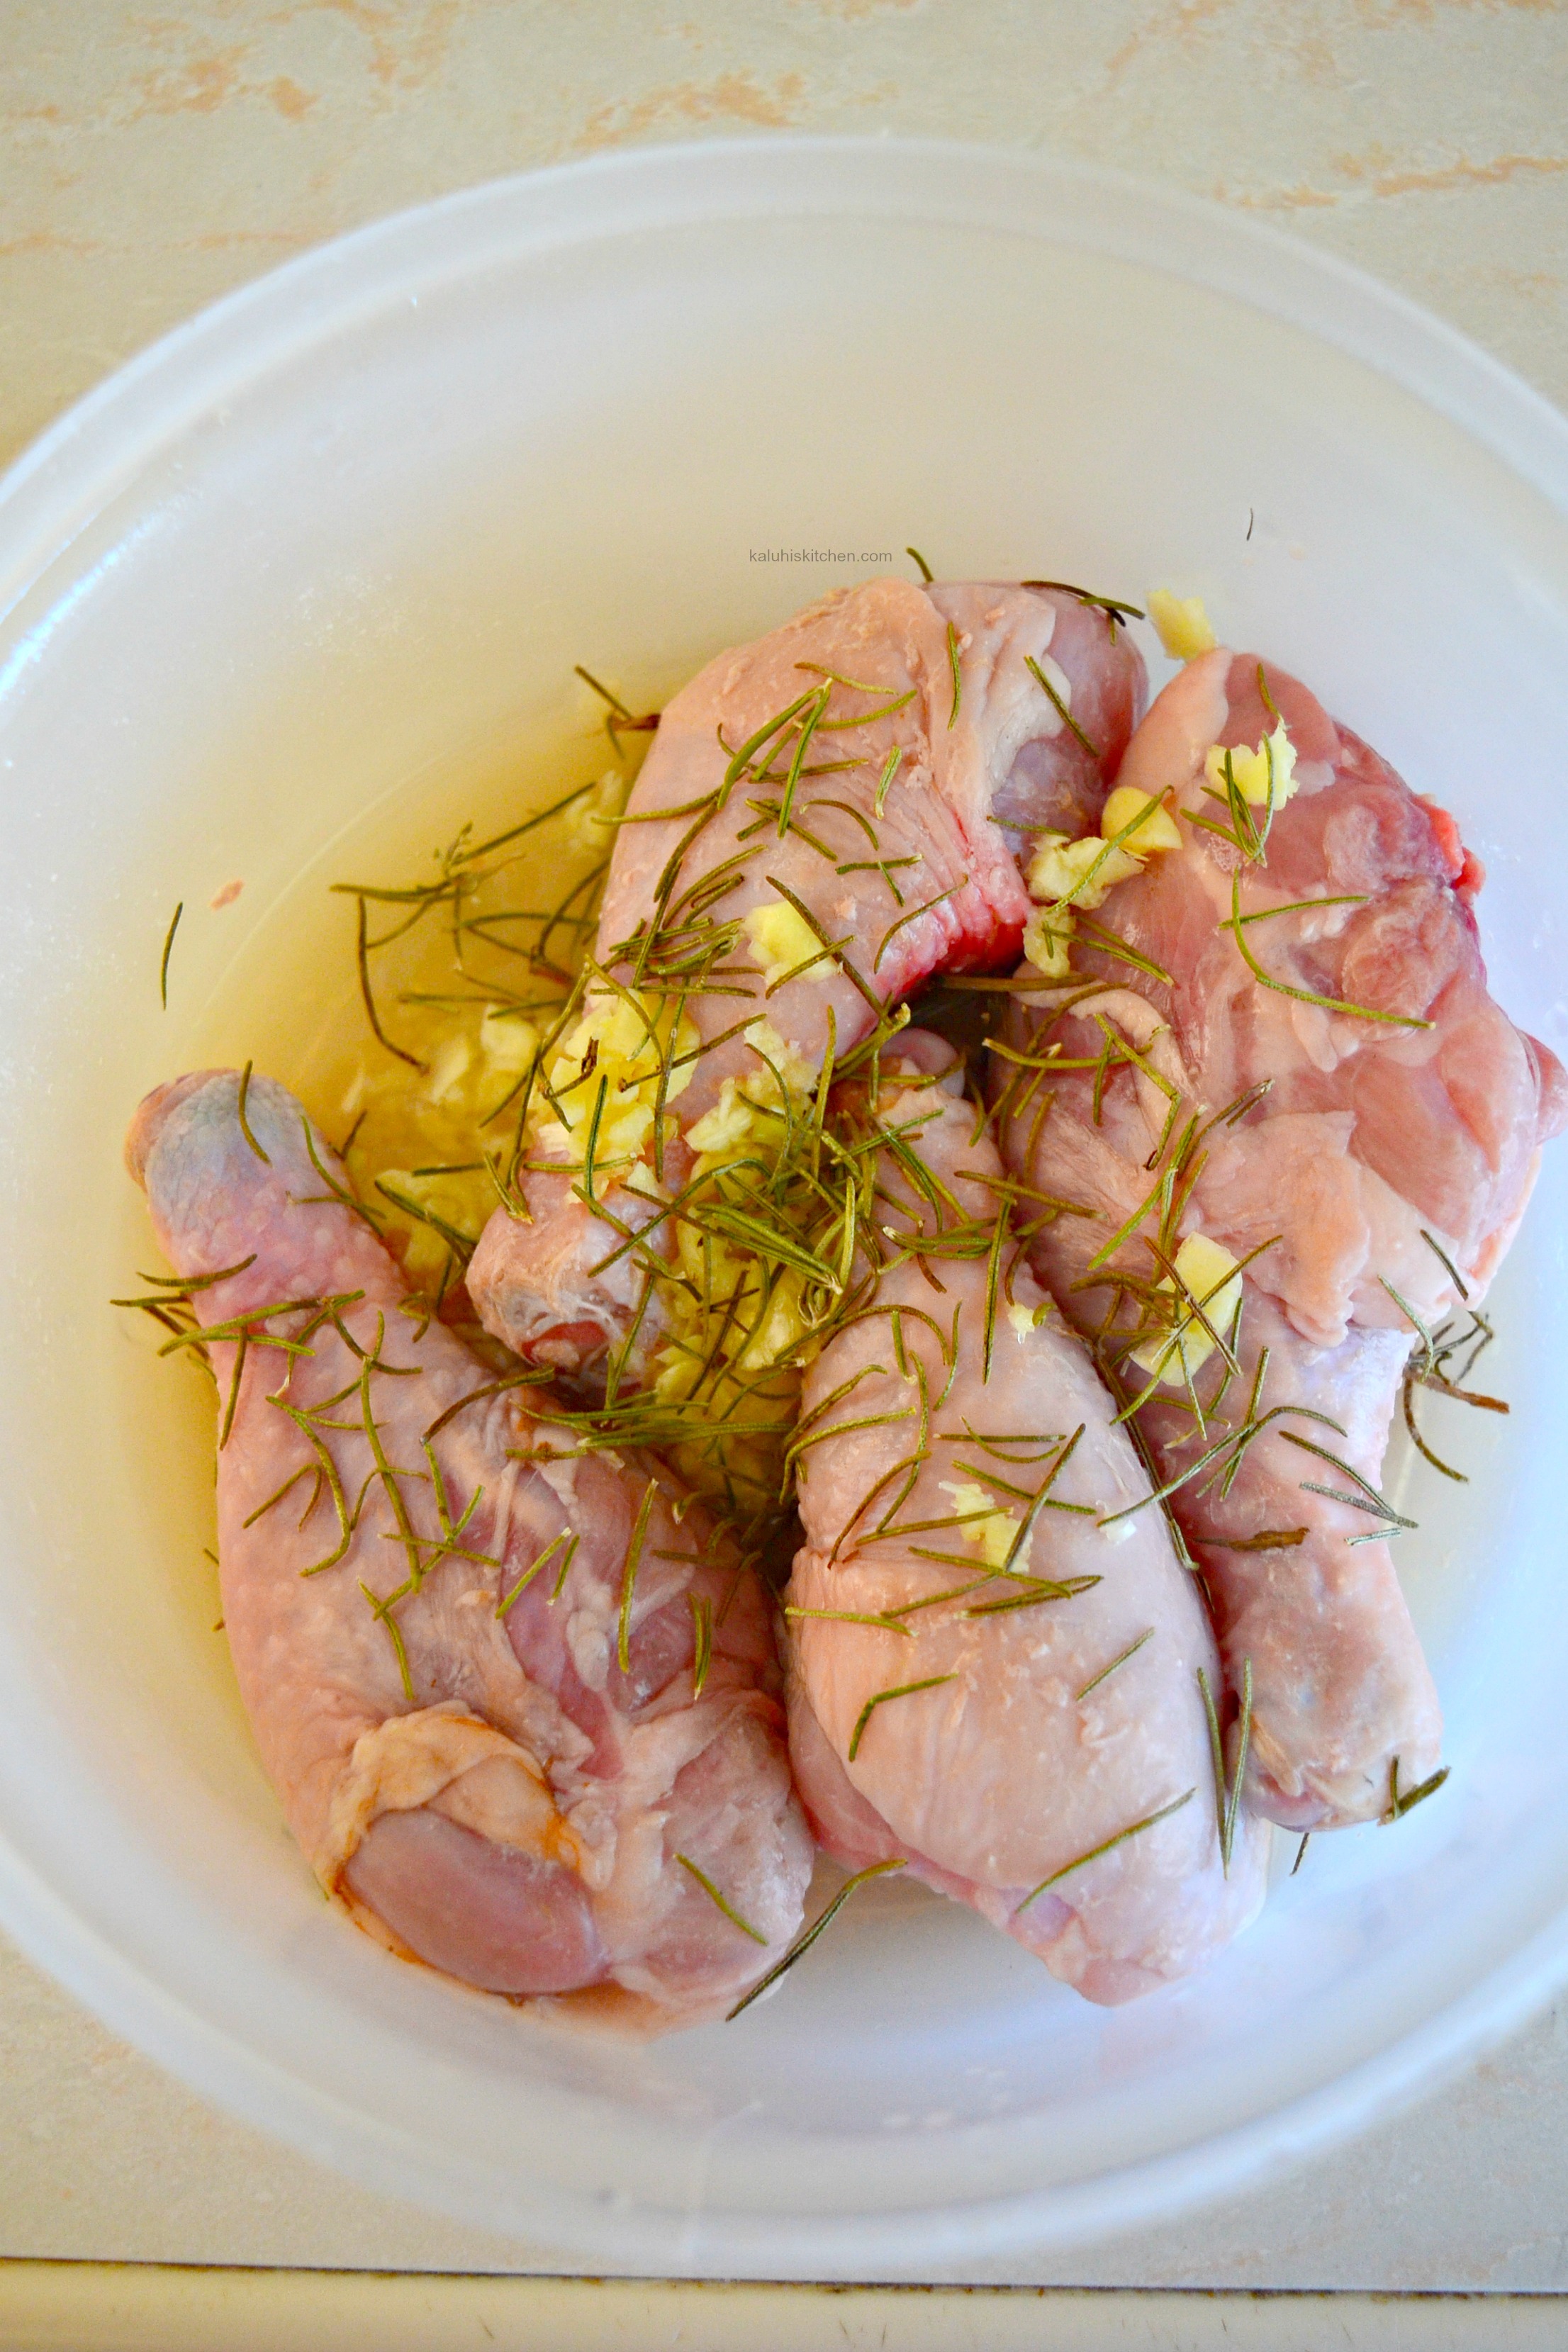 marinating-of-chicekn-with-garlic-roemary-and-apple-cider-vinegar-produces-the-best-results_kaluhiskitchen-com